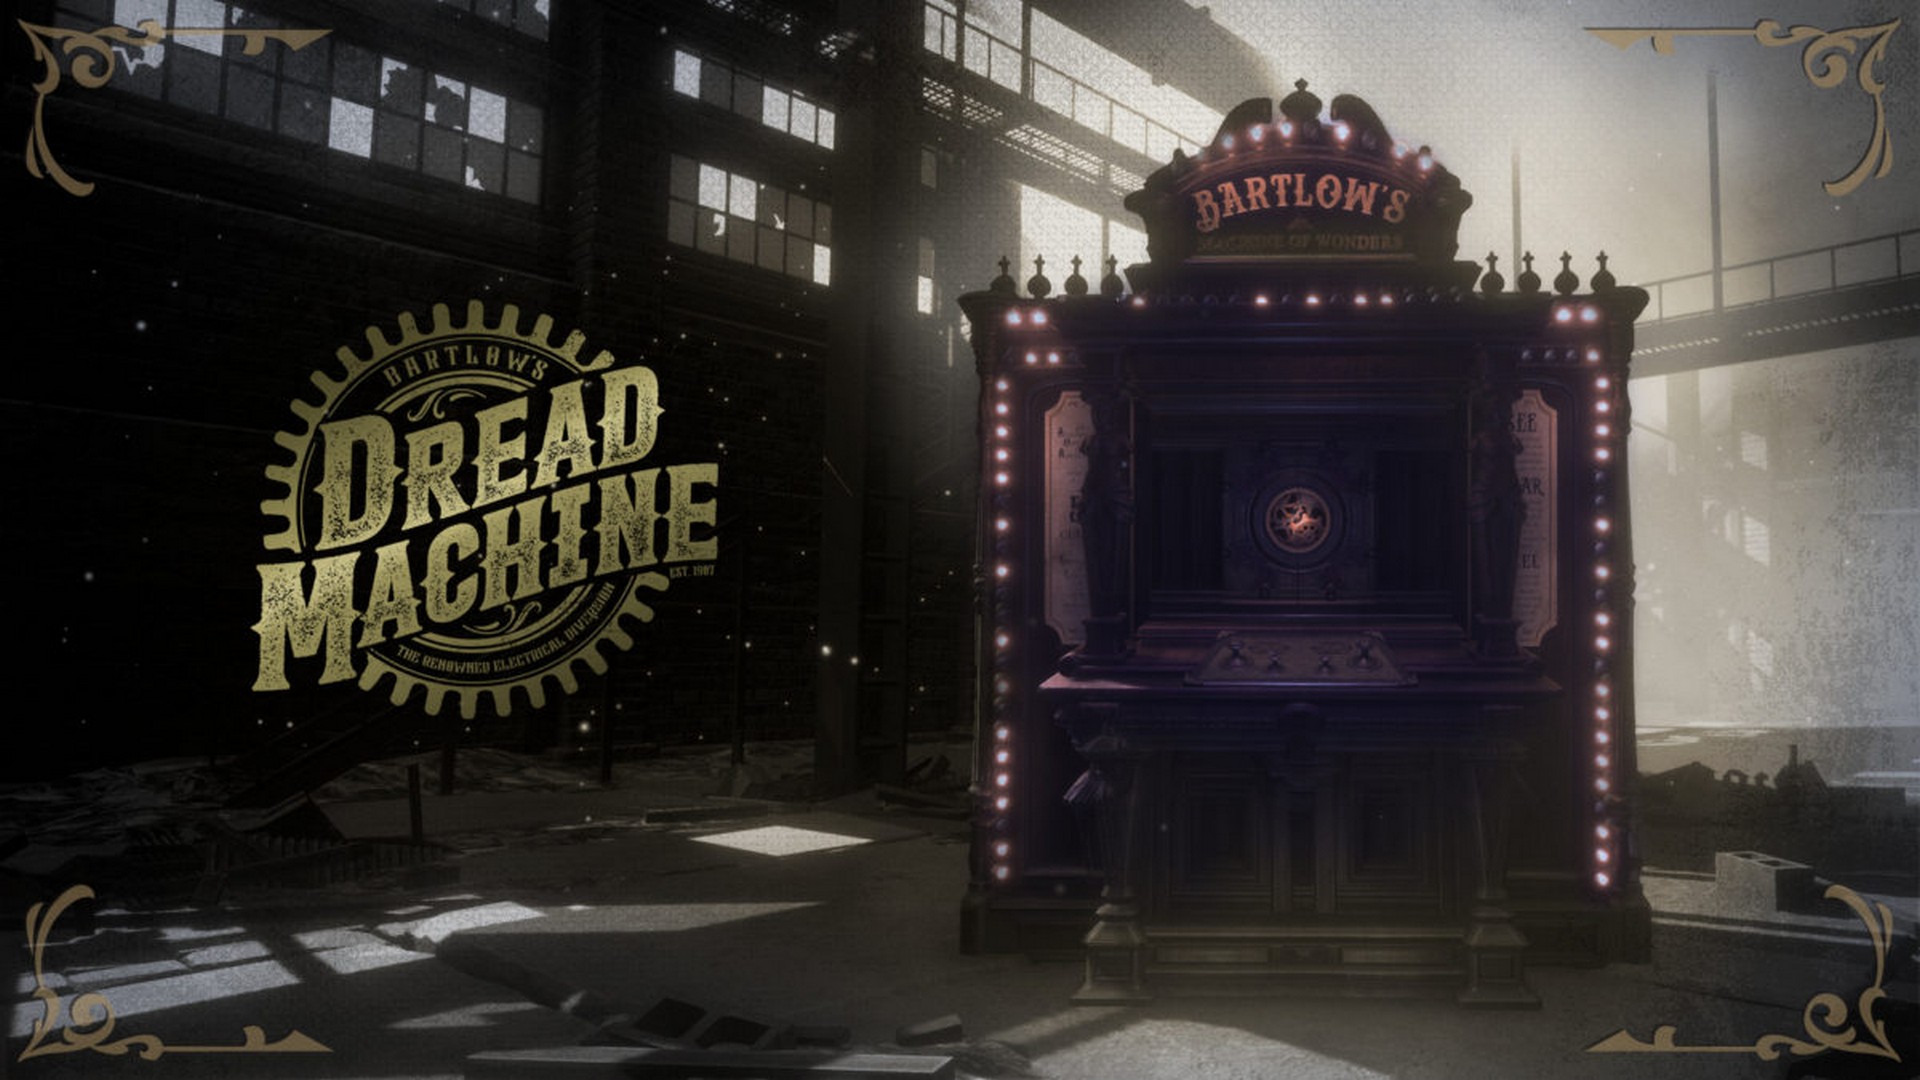 Rescue President Roosevelt In Old-Timey Arcade Shooter Bartlow’s Dread Machine, Out Today On Xbox One & Steam